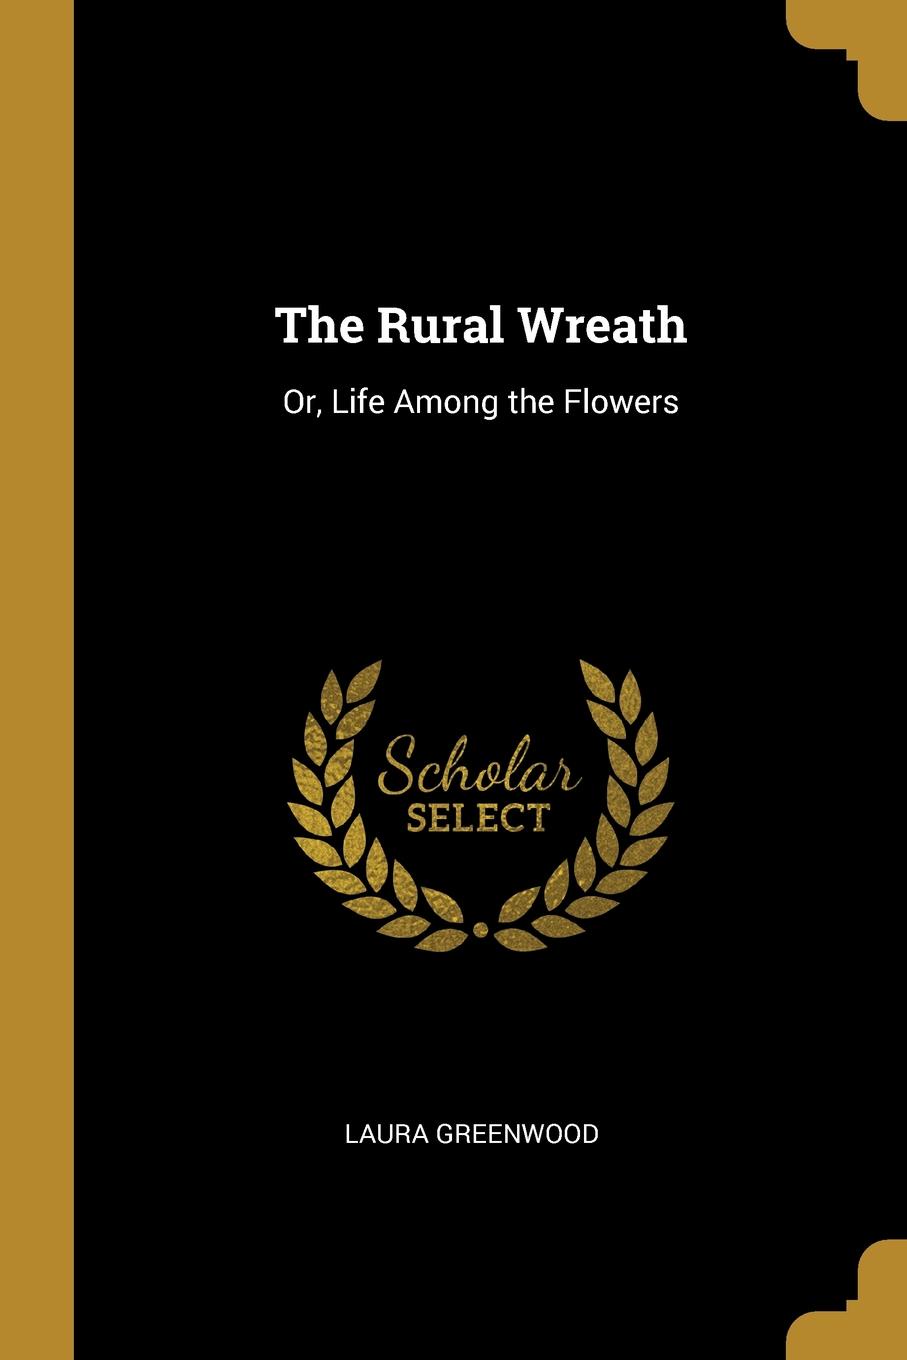 The Rural Wreath. Or, Life Among the Flowers